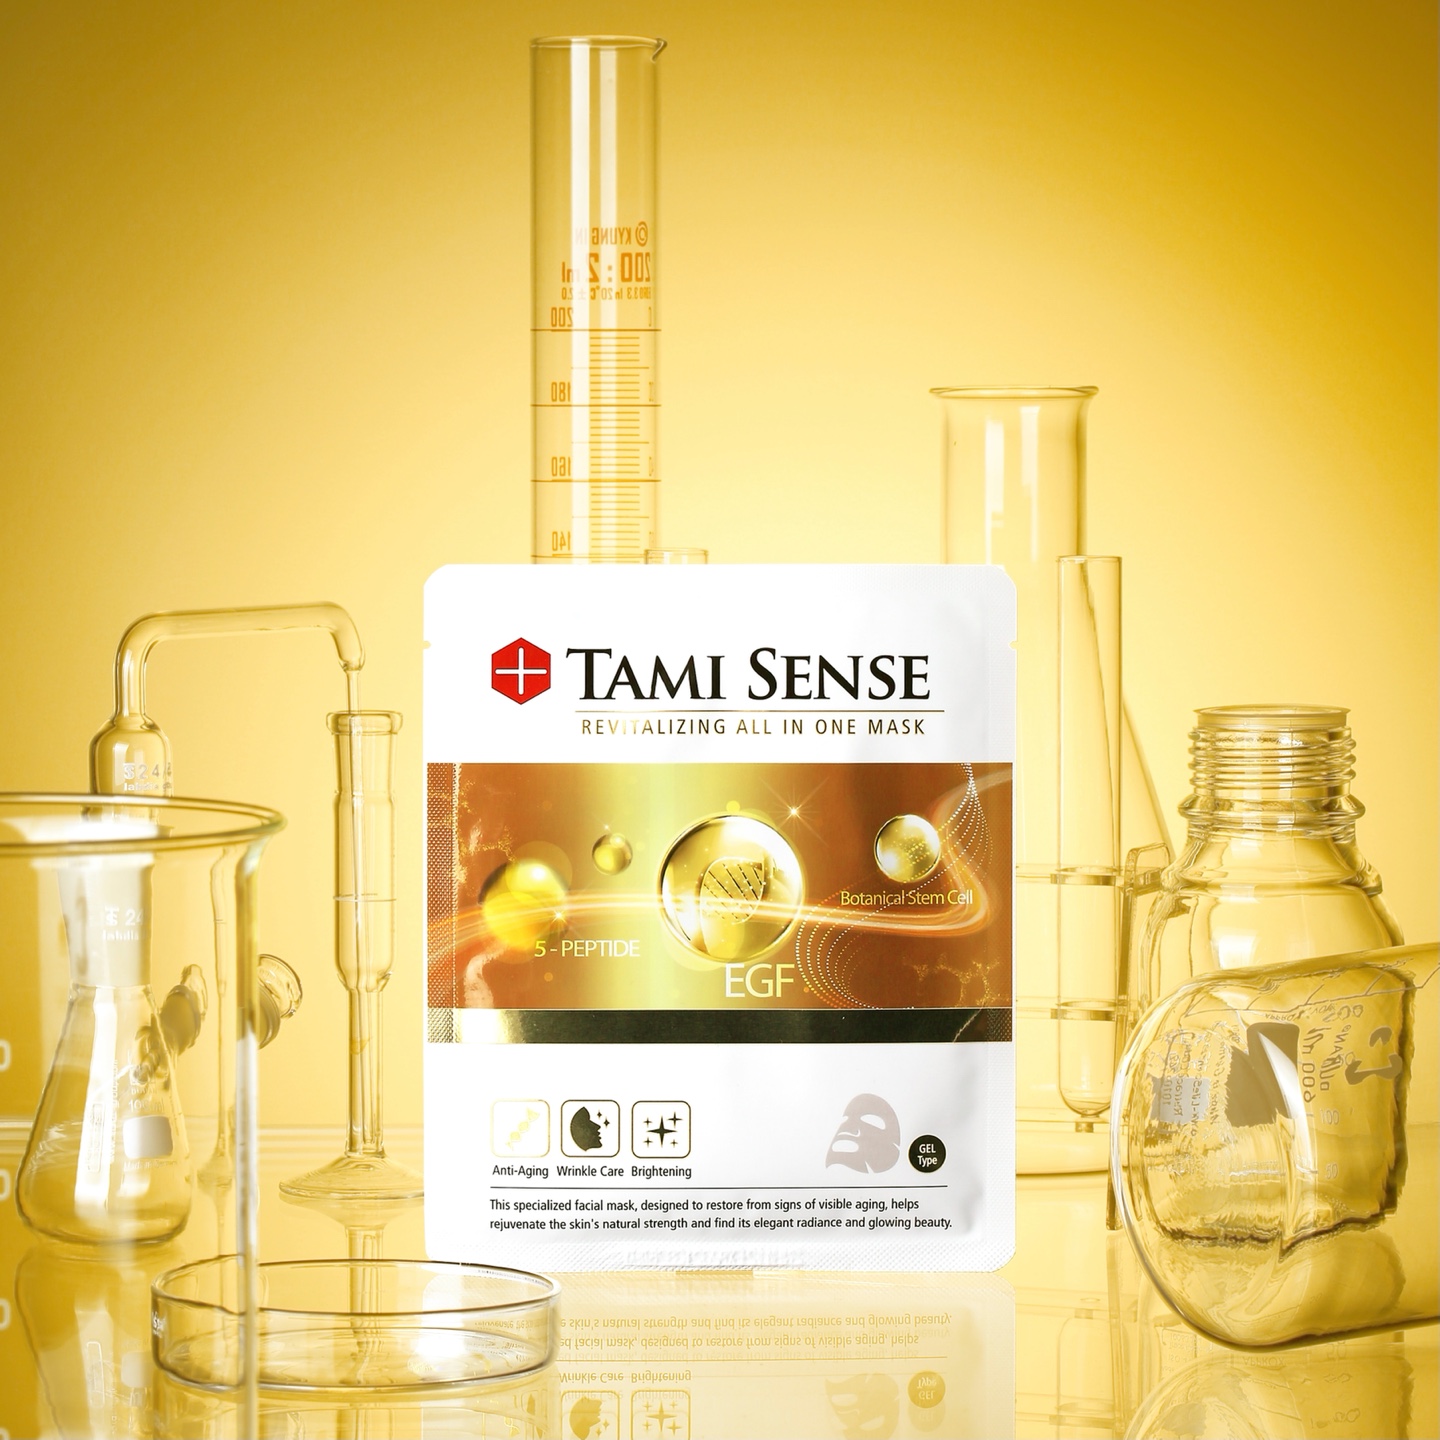 Tami Sense Launches the All-New Revitalizing All-in-One Mask